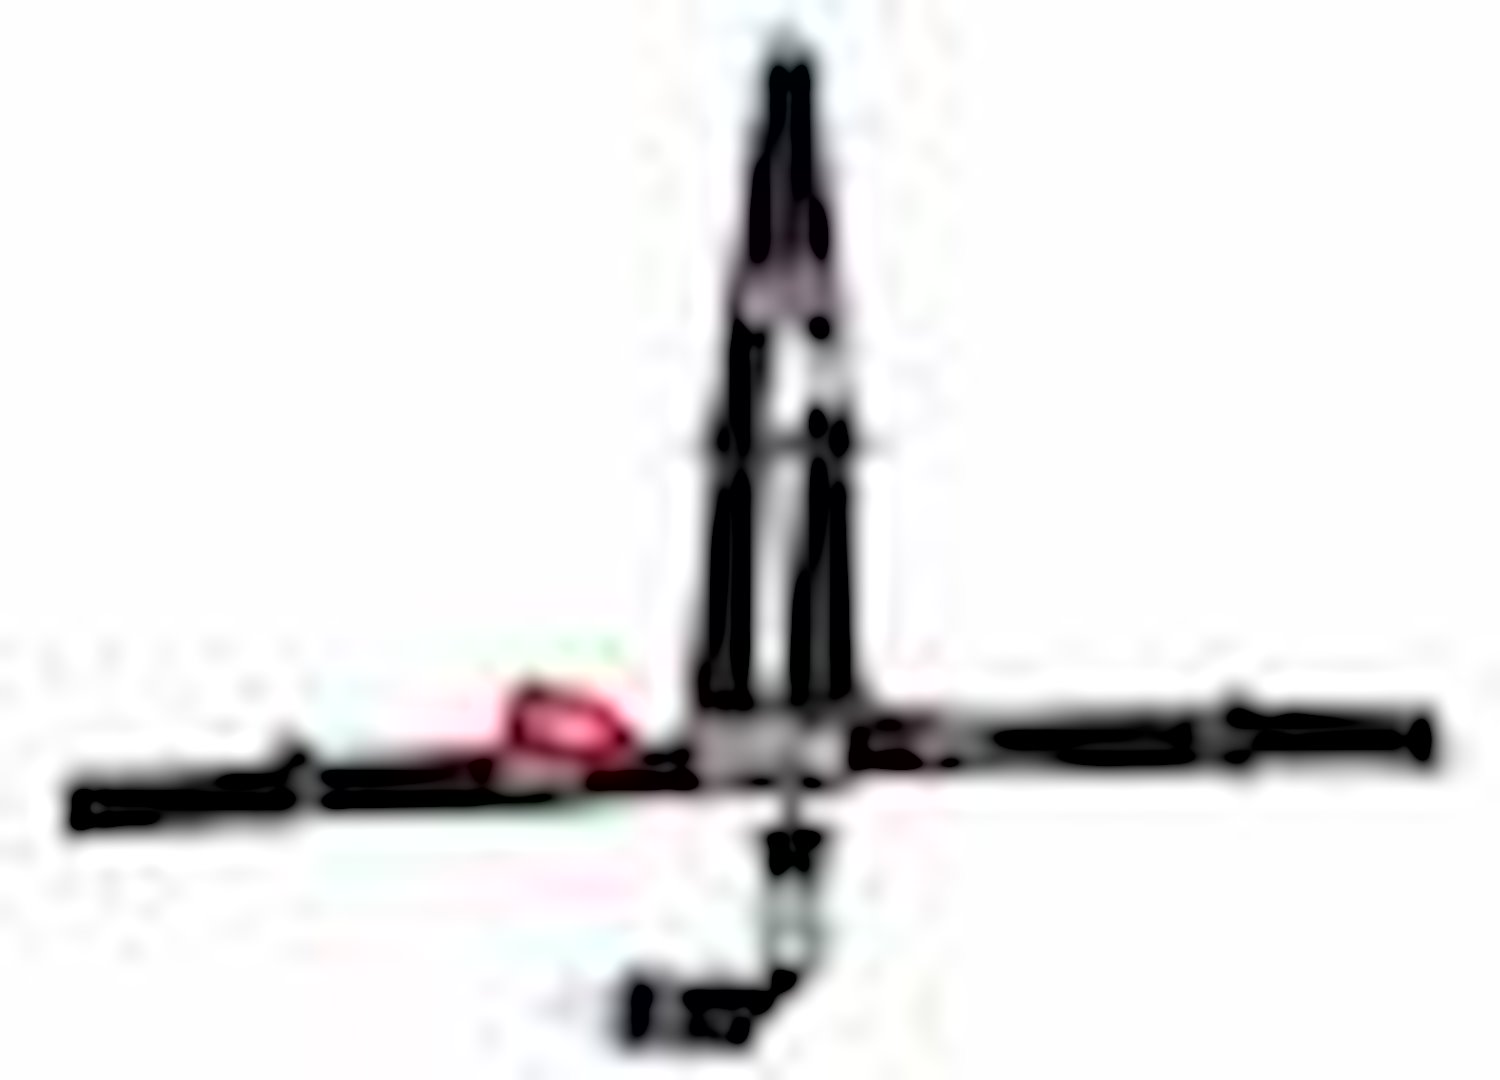 SFI 16.1 L&L HARNESS 2 PULL DOWN Lap Belt 2 Shoulder Harness Individual ROLL BAR Mount 2 DOUBLE Sub ALL WRAP/BOLT ENDS HOT PINK